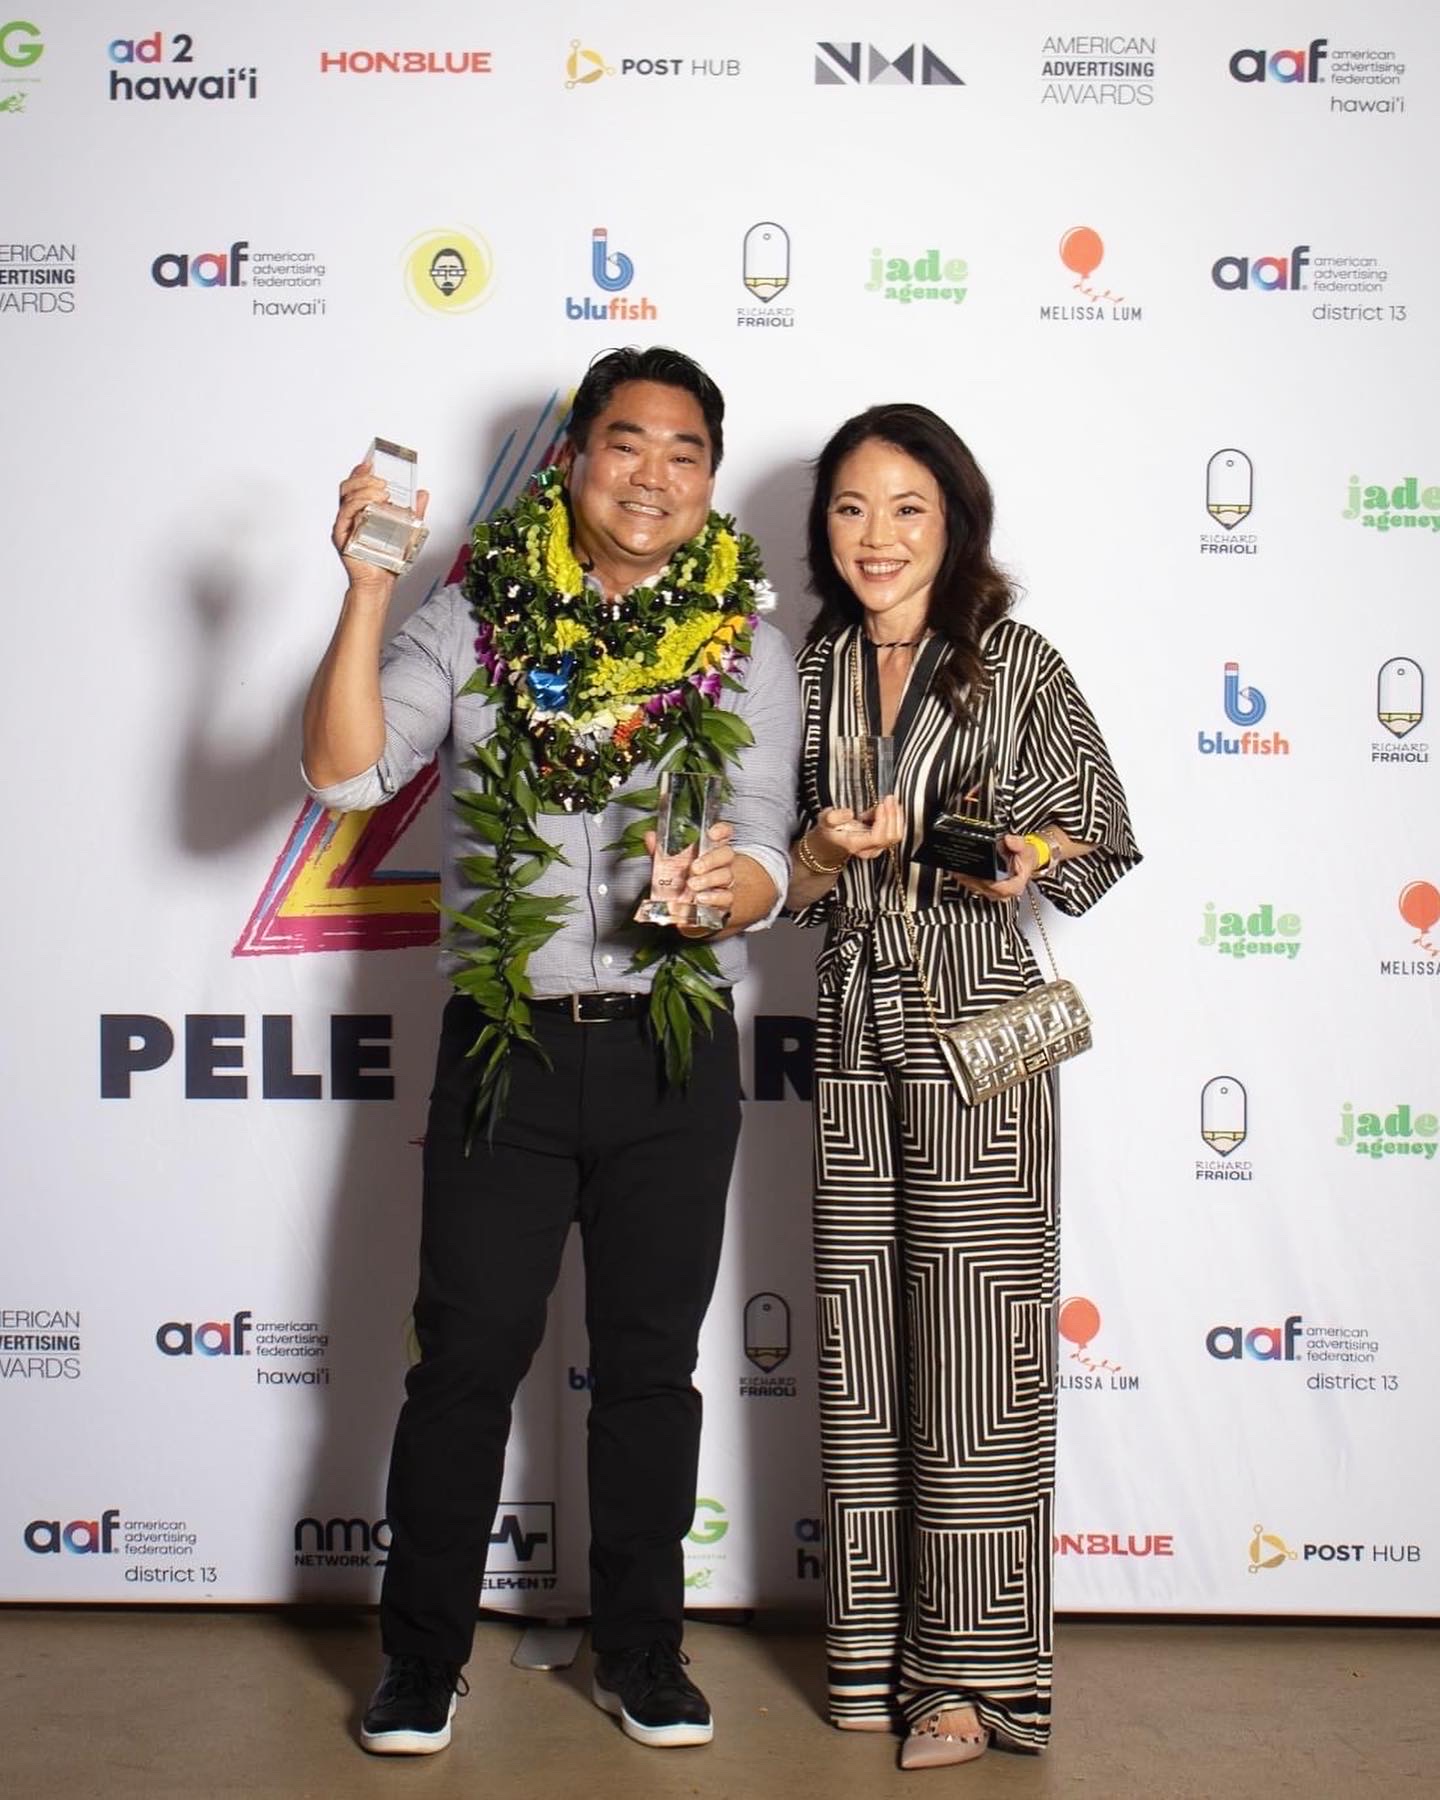 A man holding a trophy next to a woman and both are smiling in front of a backdrop with various logos.